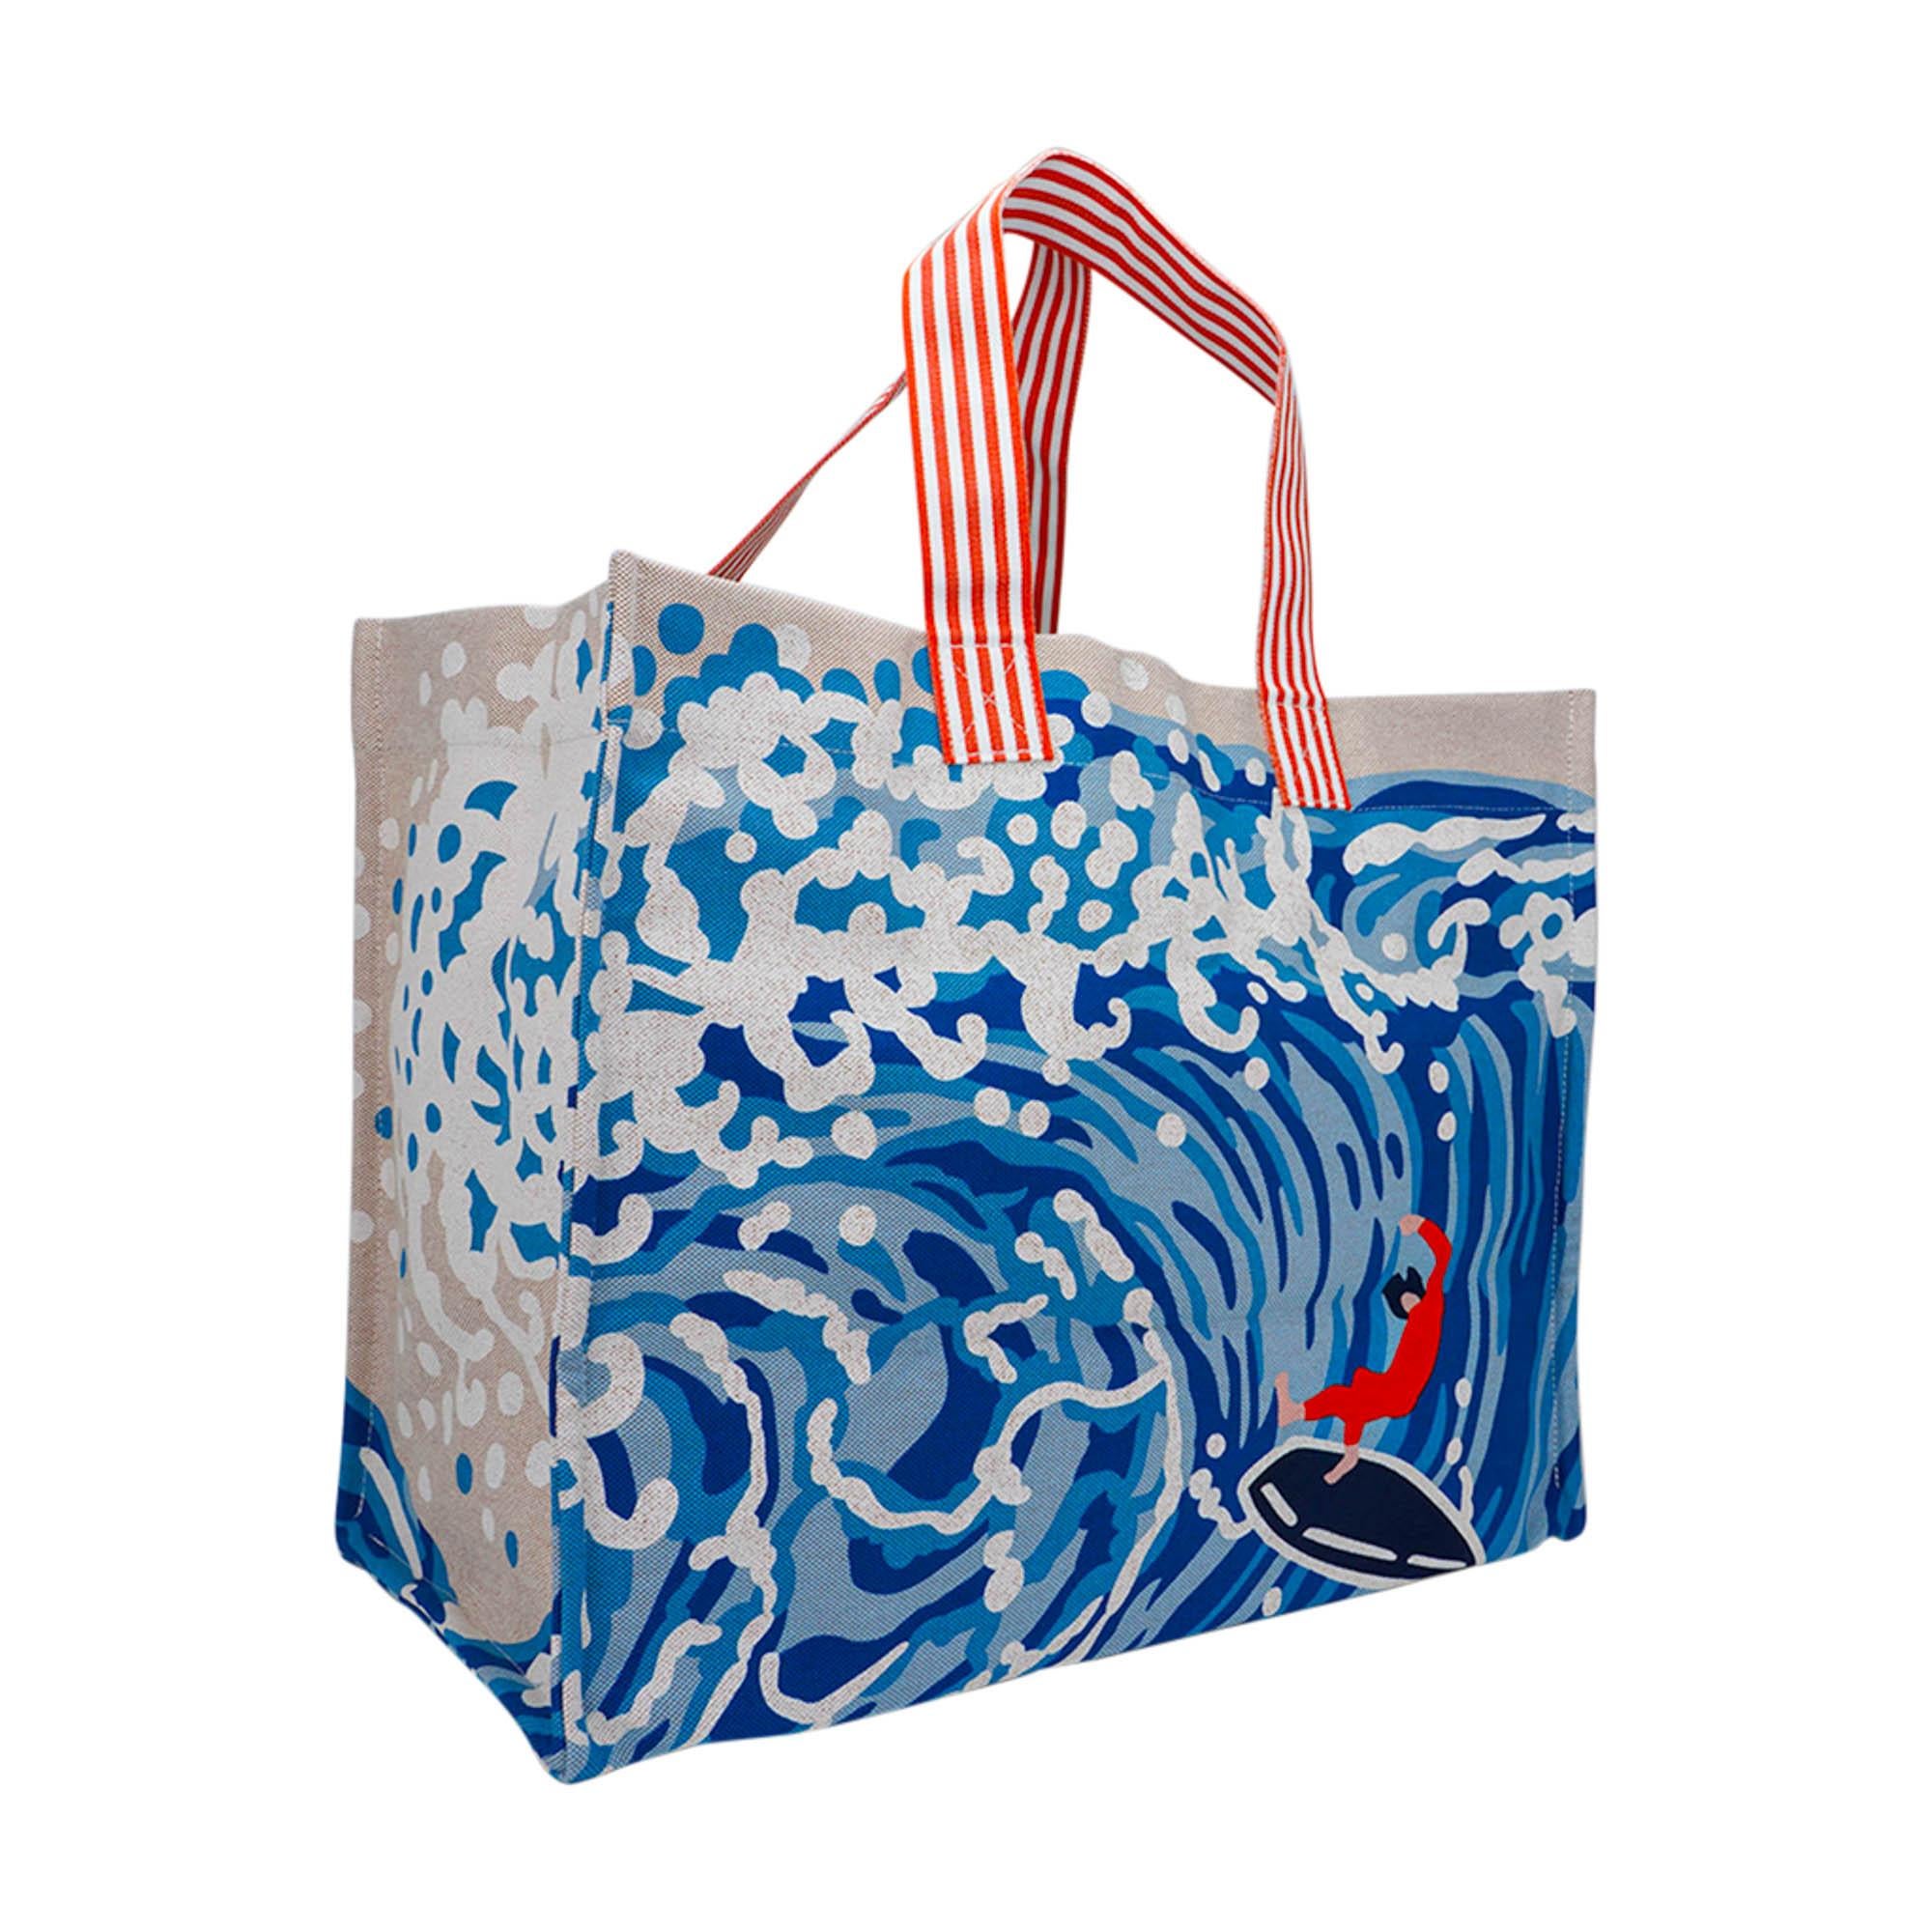 Mightychic offers an Hermes Wave Beach bag featured in Denim.
Depicts a surfer riding a big wave.
Two orange interior pockets.
Can be carried over the shoulder or by hand.
Woven and screen printed in France.
Marvelous spacious tote!
Hermes Beach